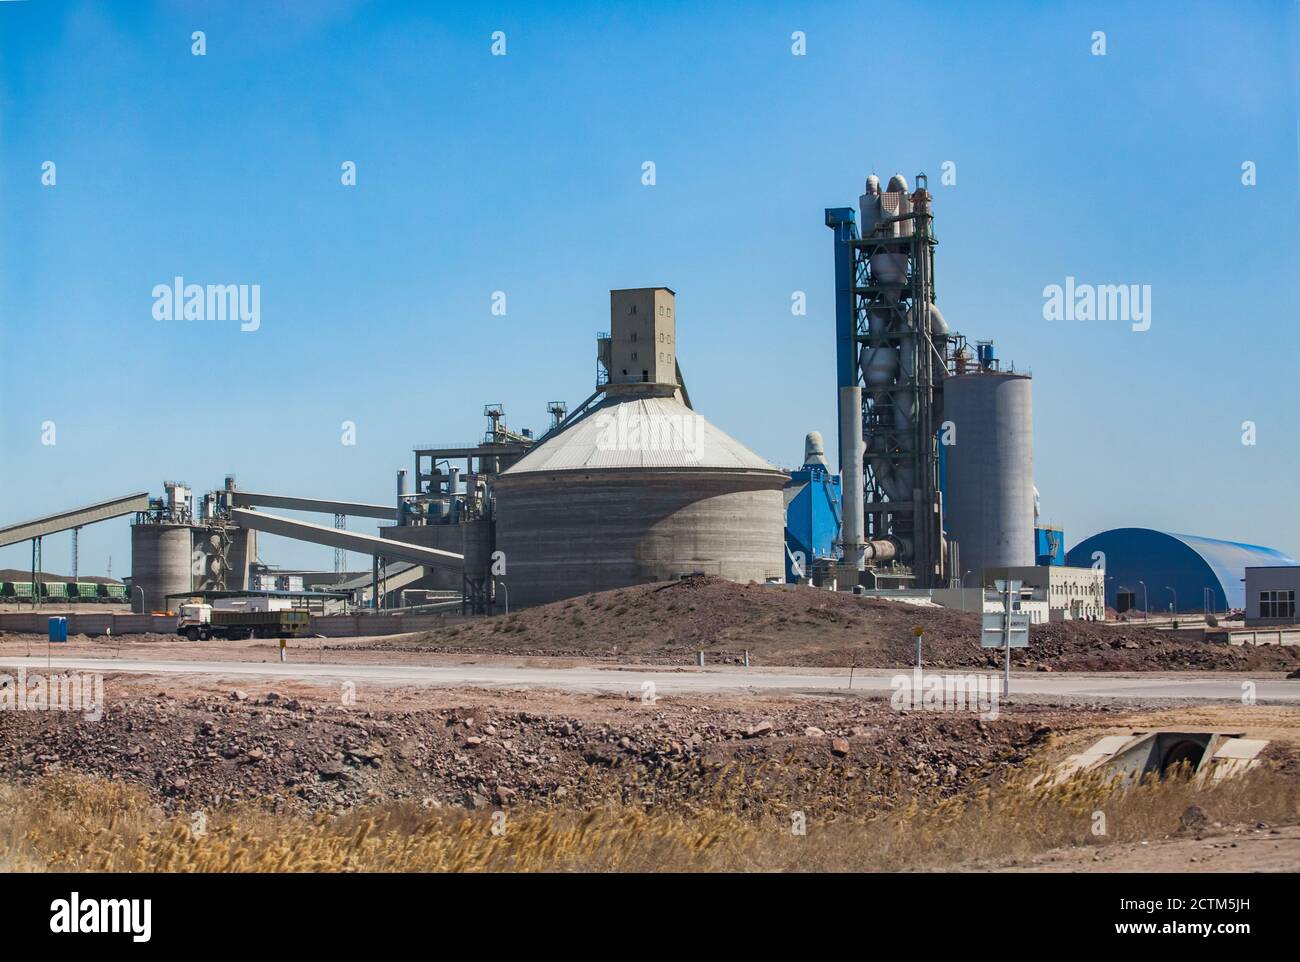 Mynaral/Kazakhstan - April 23 2012: Jambyl Cement plant tower and silos with transporter conveyors on clear blue sky and desert. Stock Photo